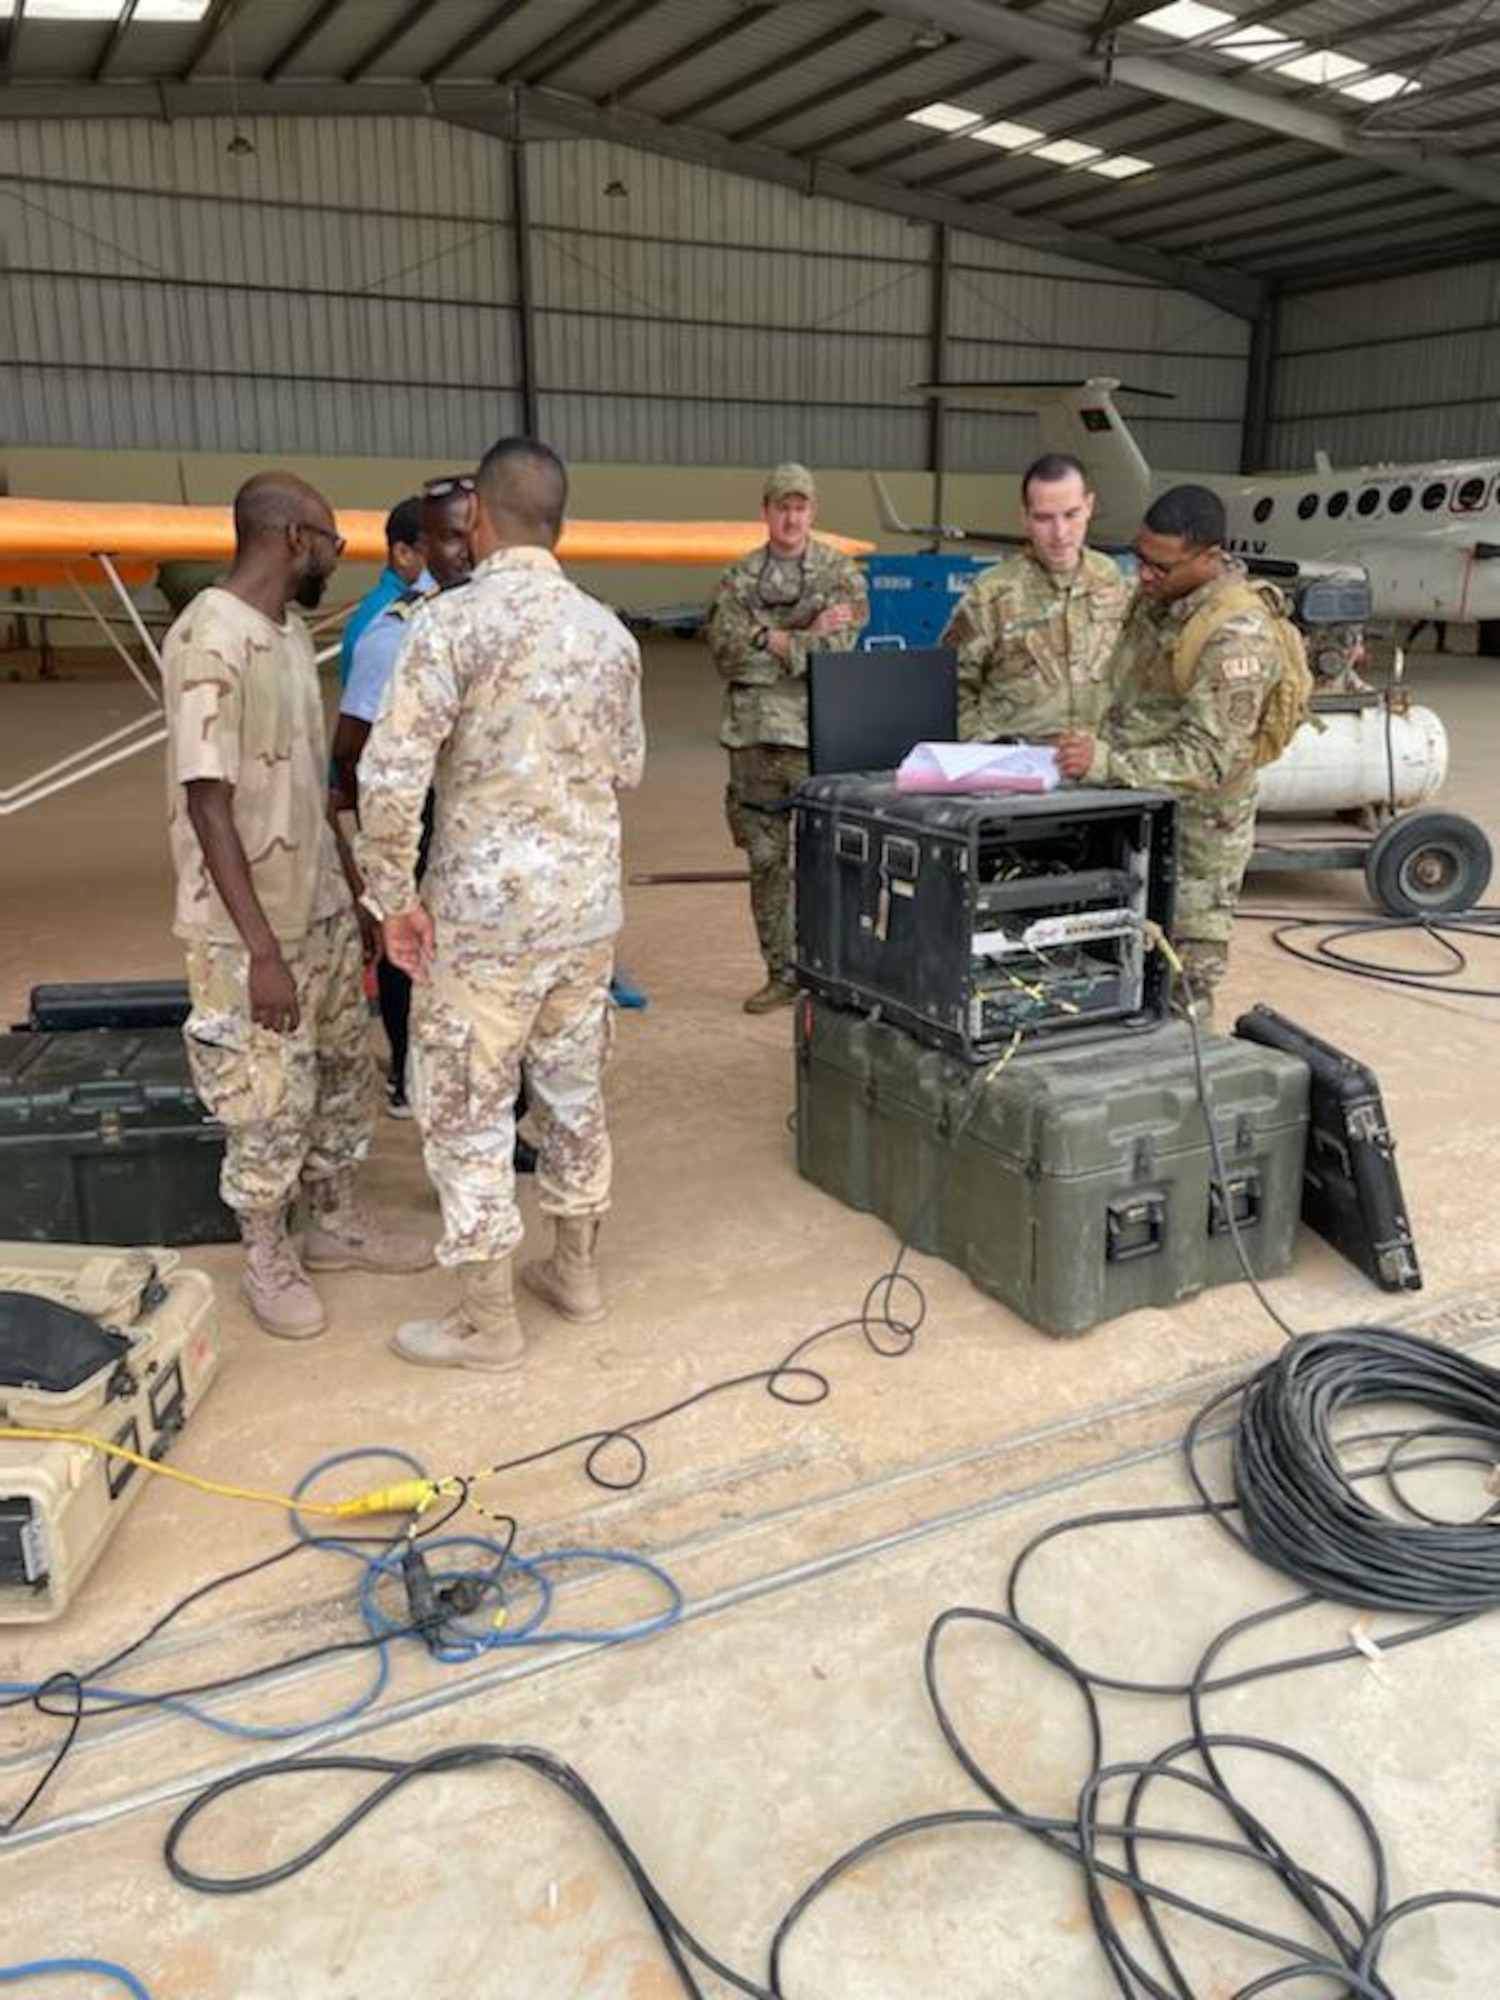 Members of the 818th Mobility Support Advisory Squadron assess ground intelligence, surveillance, and reconnaissance equipment before an air-to-ground communications exercise